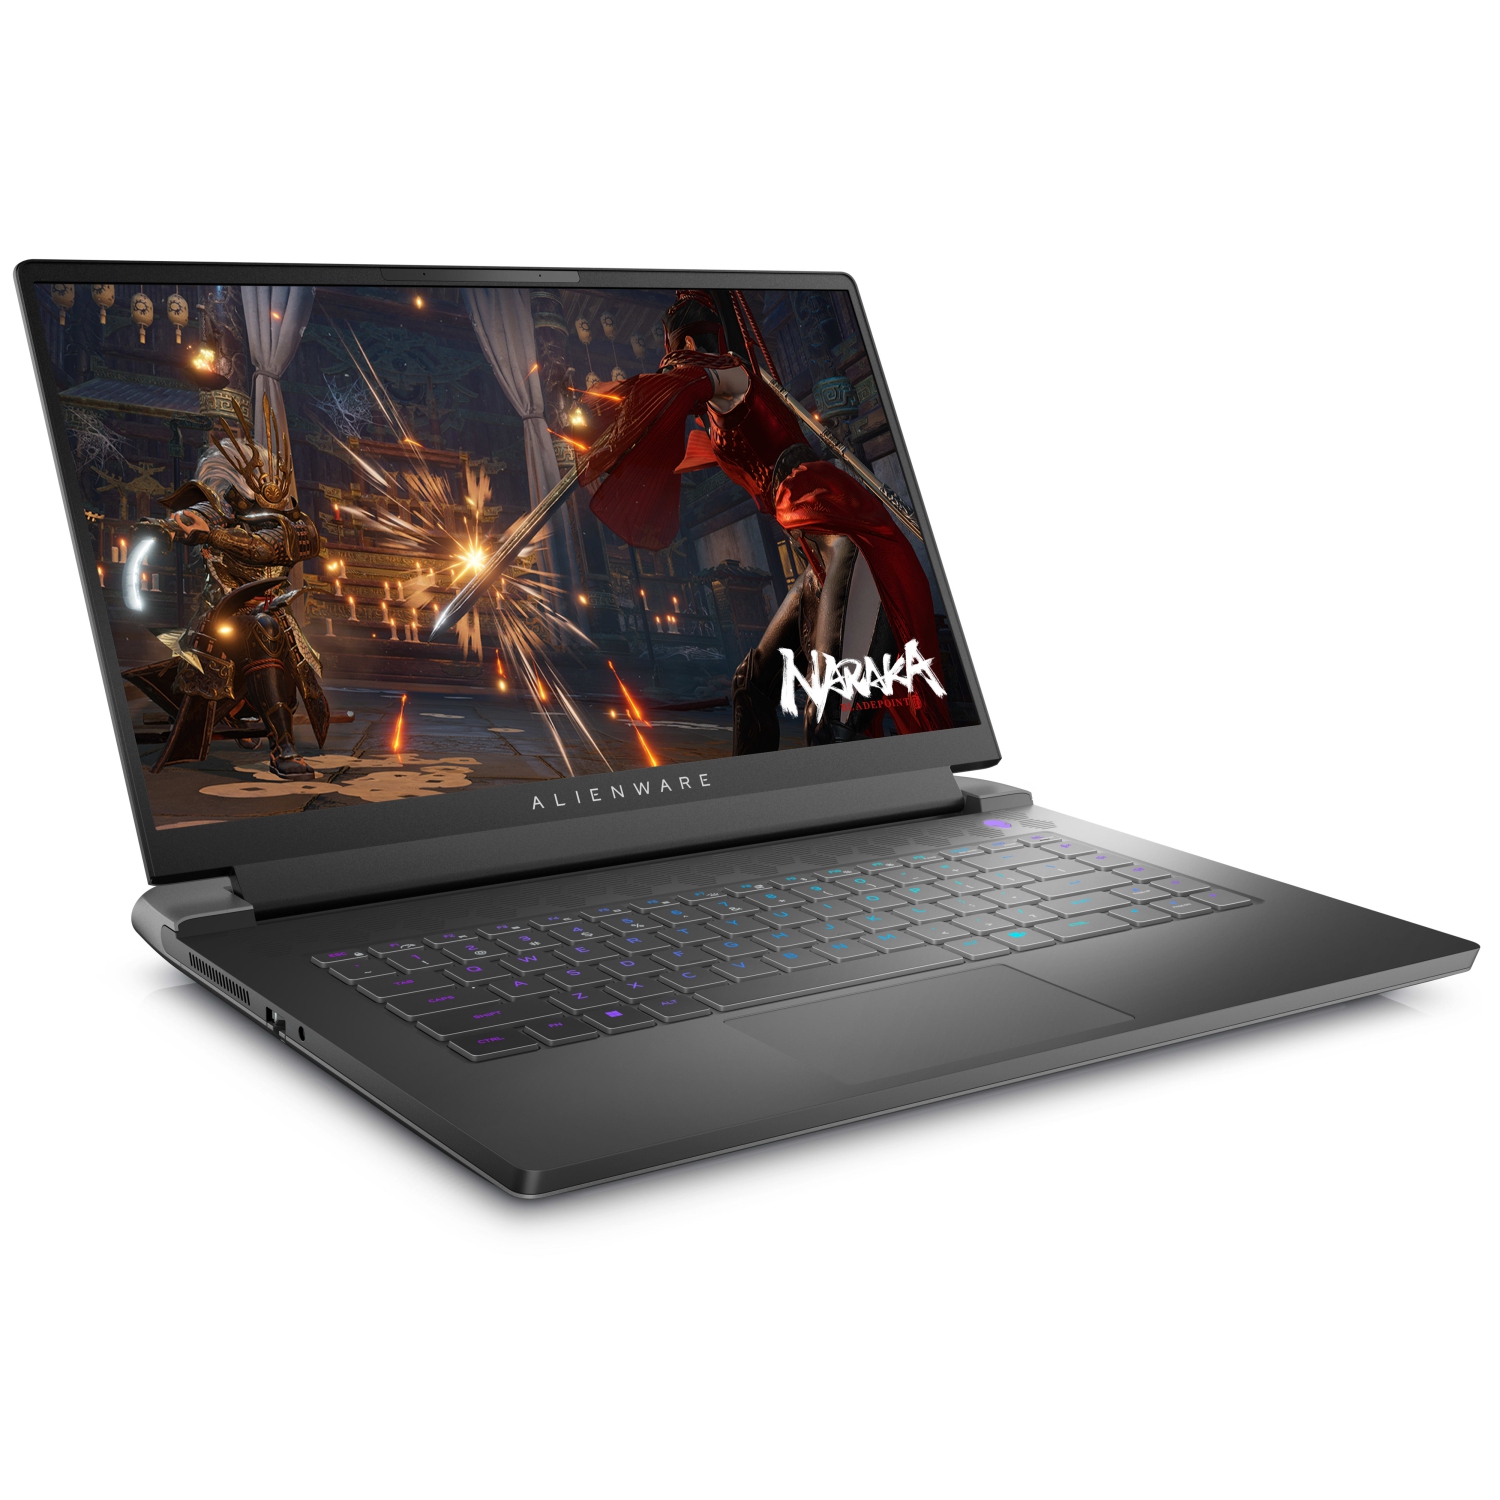 Refurbished (Excellent) – Dell Alienware m15 R7 Gaming Laptop (2022) | 15.6" FHD | Core i9 - 2TB SSD - 16GB RAM - RTX 3080 | 14 Cores @ 5 GHz - 12th Gen CPU - 8GB GDDR6X